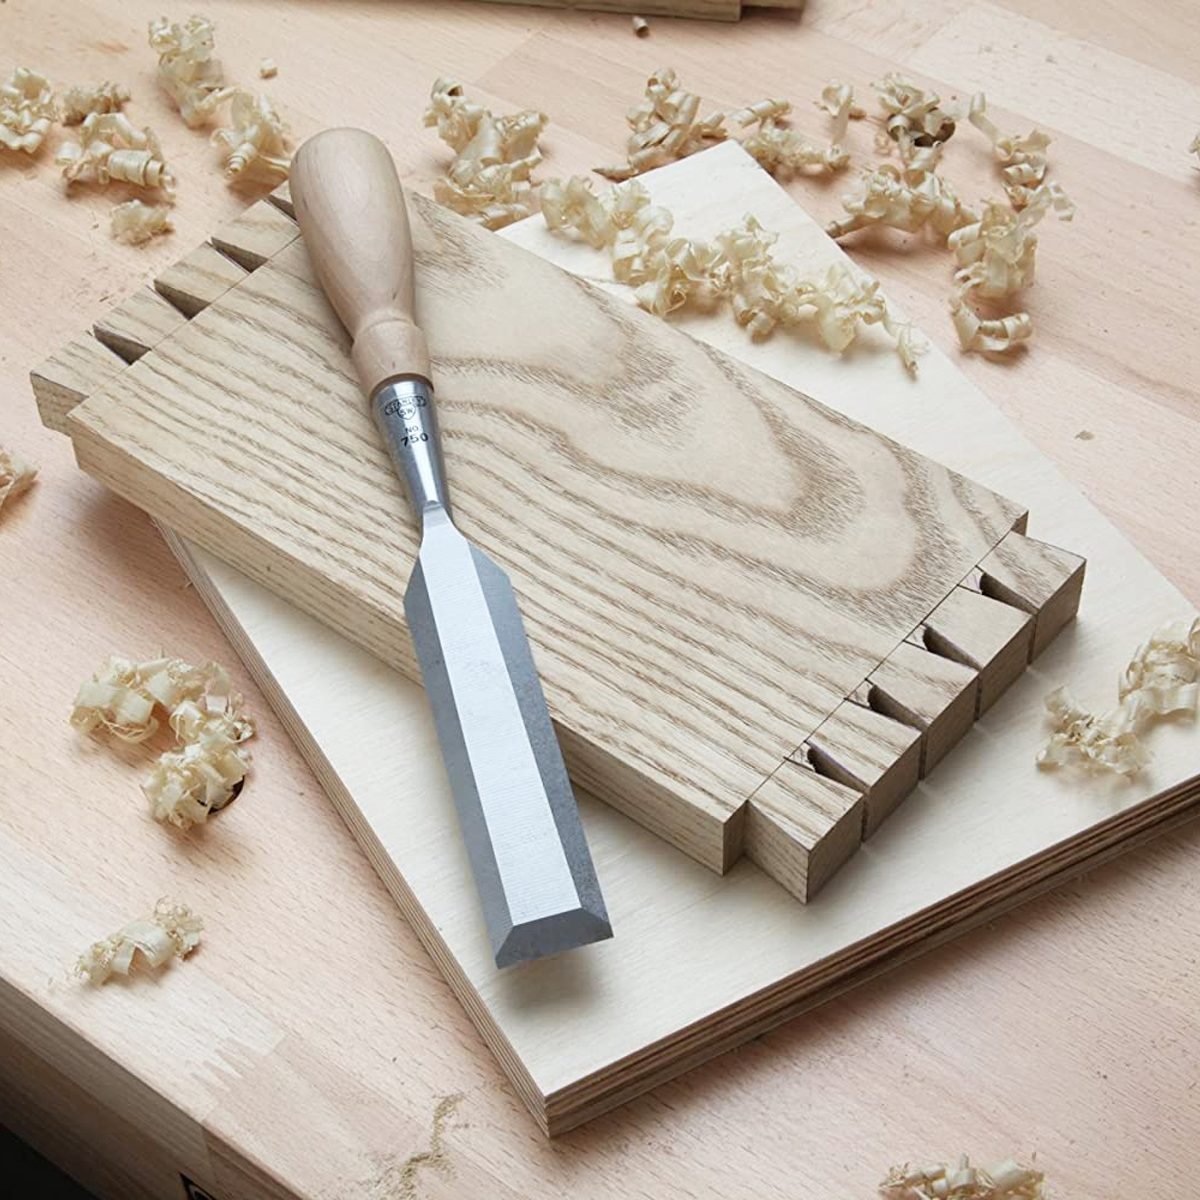 15 Handy Gifts for Woodworkers They'll Use for Many Projects to Come